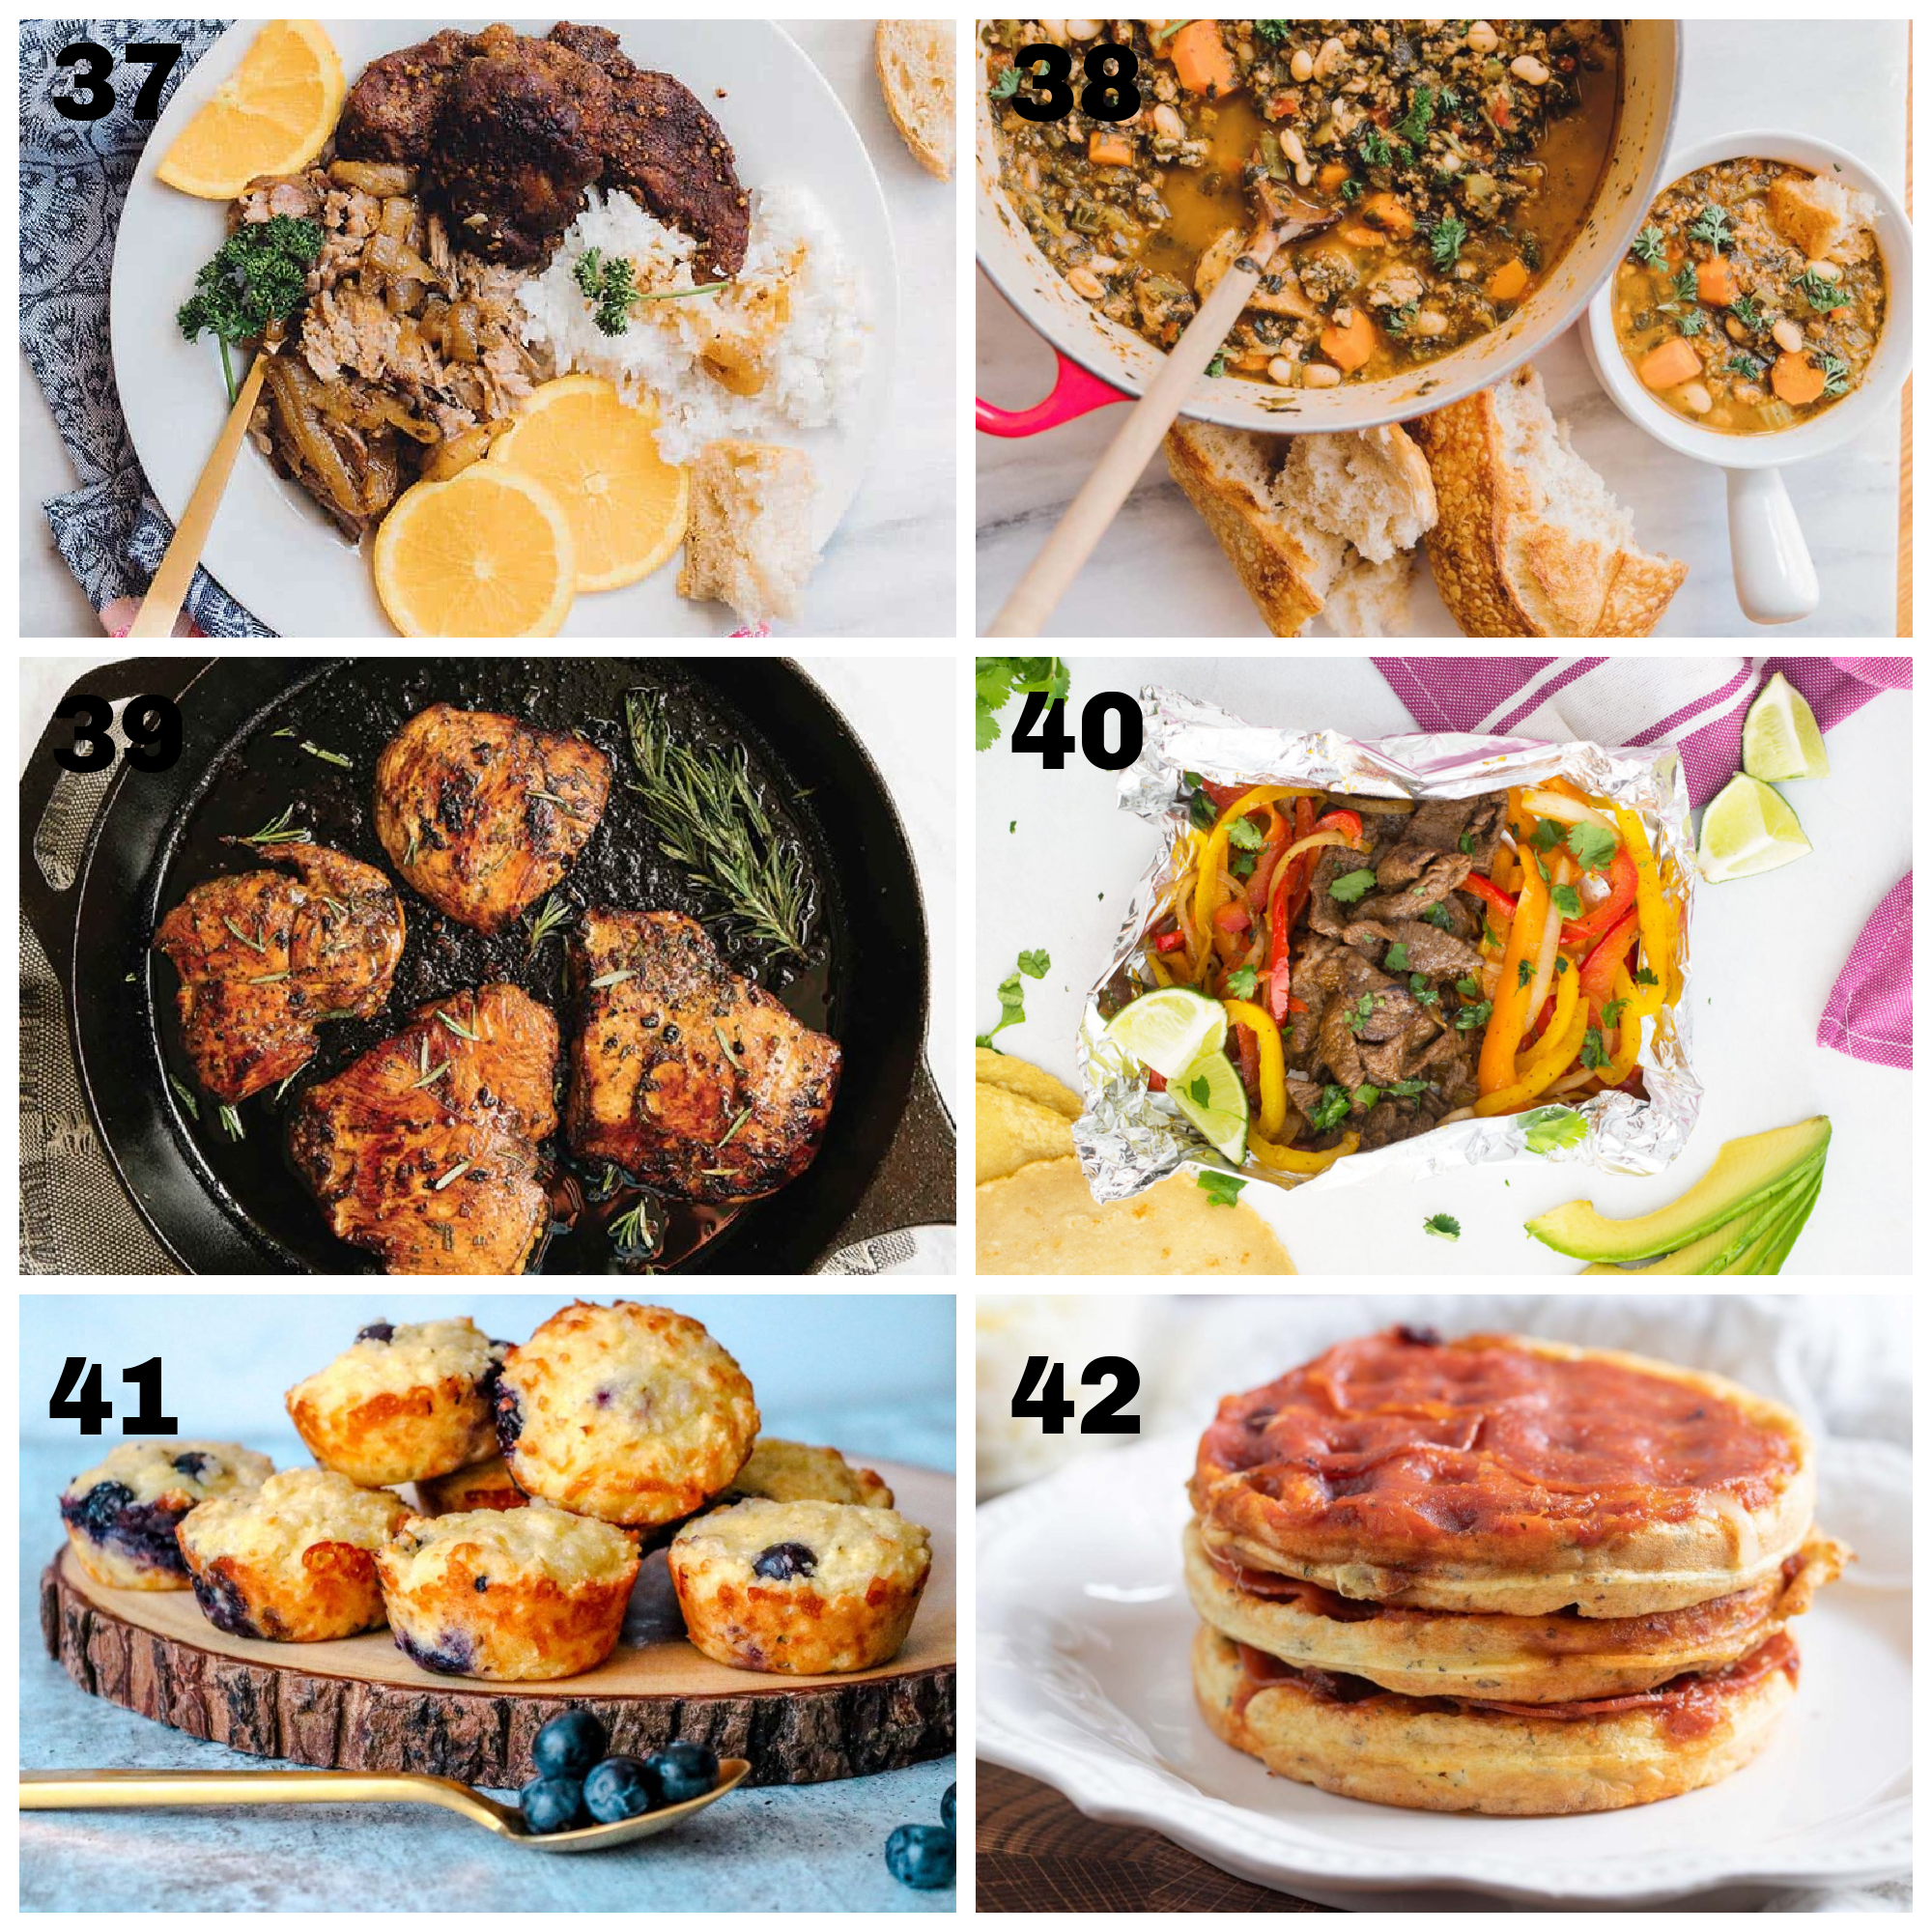 6 completed dinner ideas for low carb make ahead meals labeled 37-42